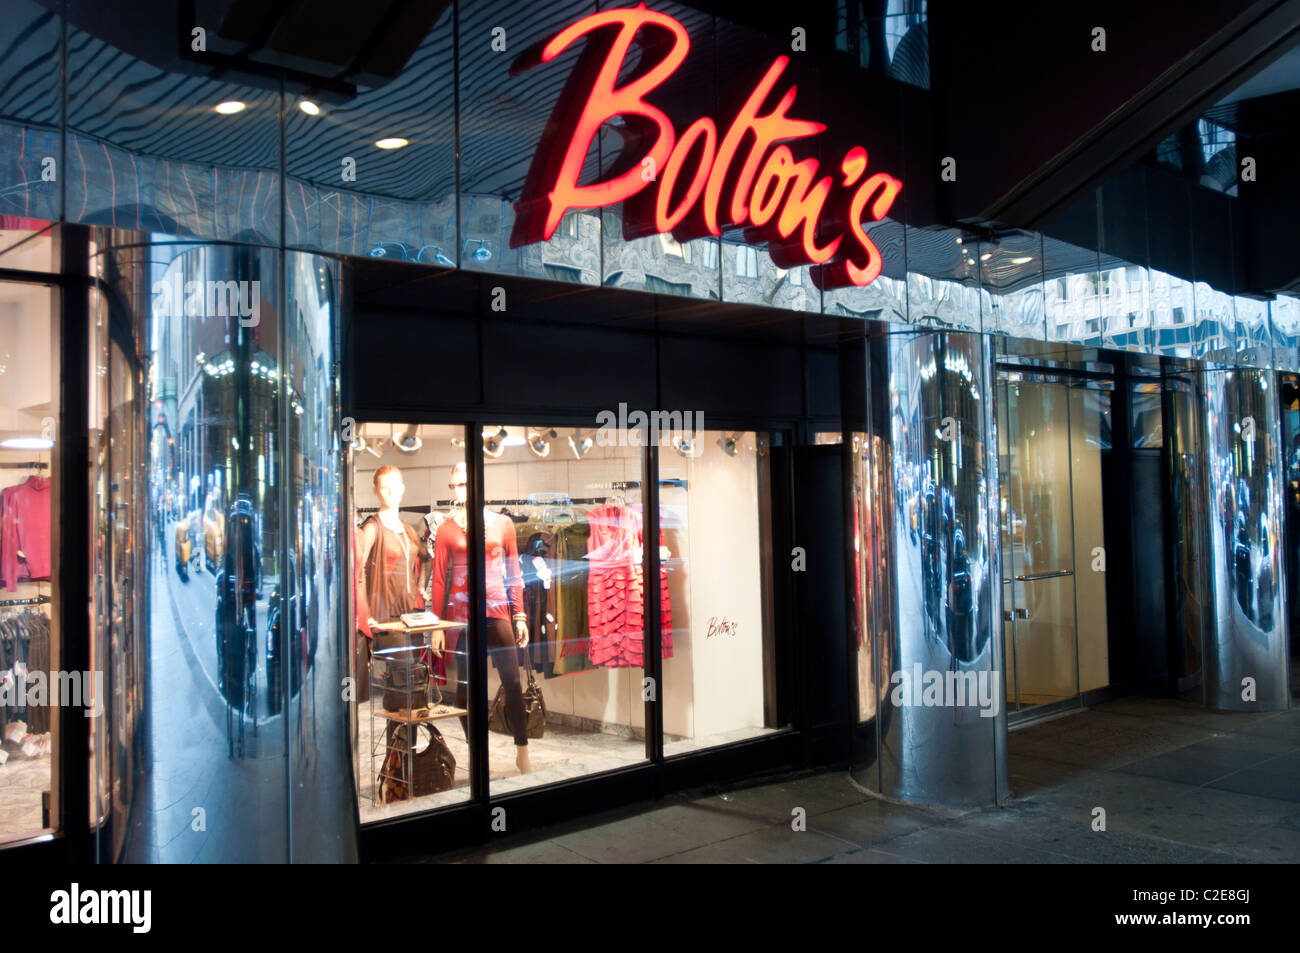 Bolton's store front at 109 East 42nd Street, Manhattan, New York City, USA Stock Photo